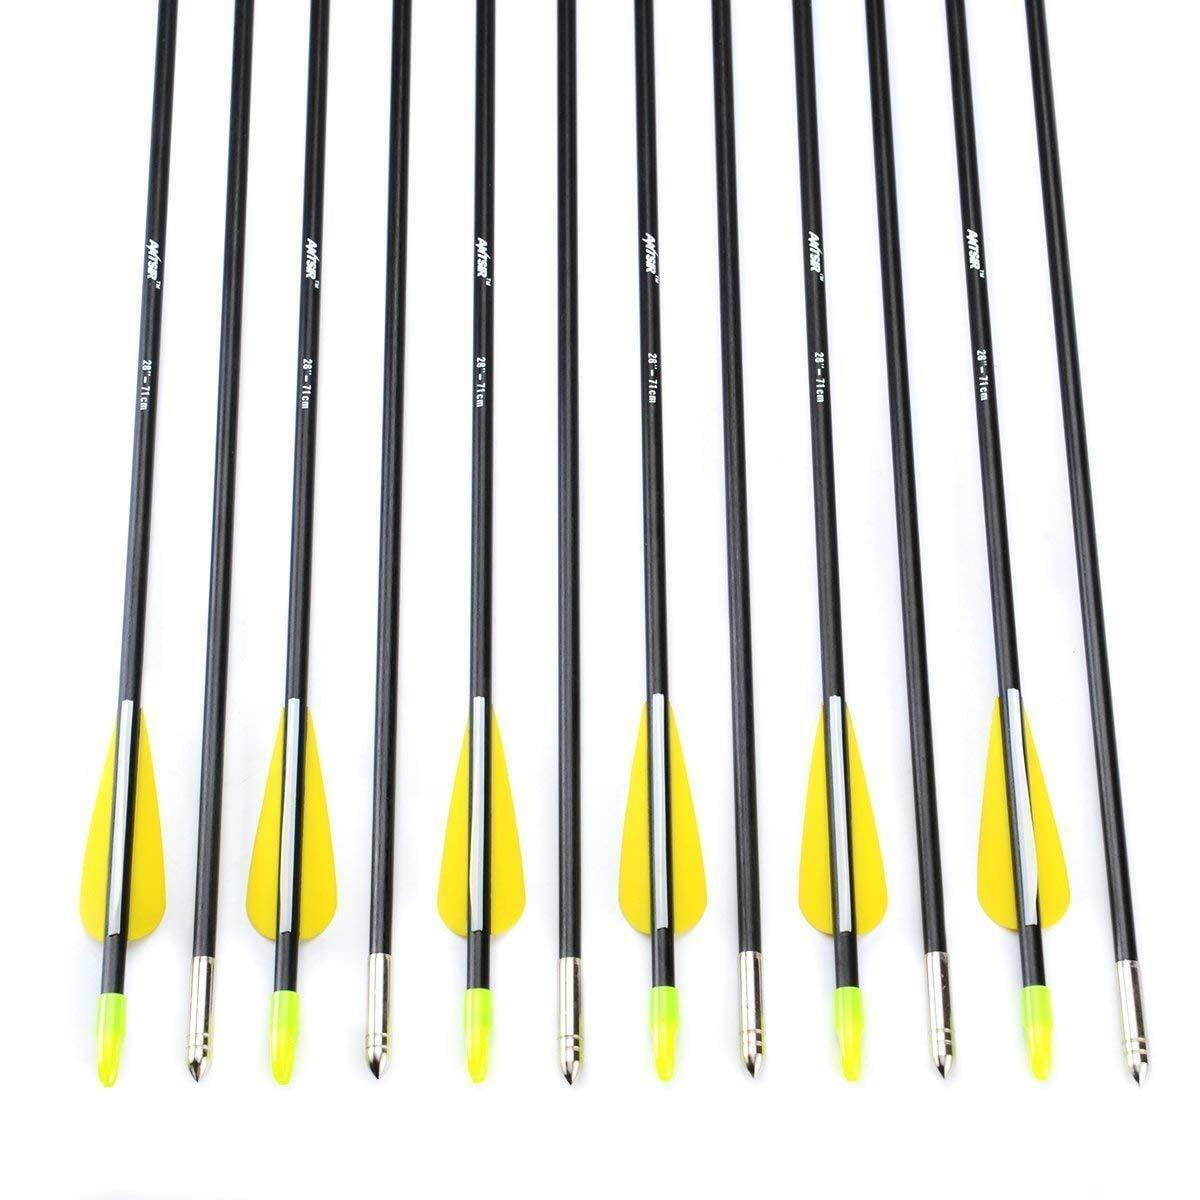 DELI-MJ 30-inches Fiberglass Archery Target Arrows Practice Arrow or Youth Arrow for Recurve Bow 